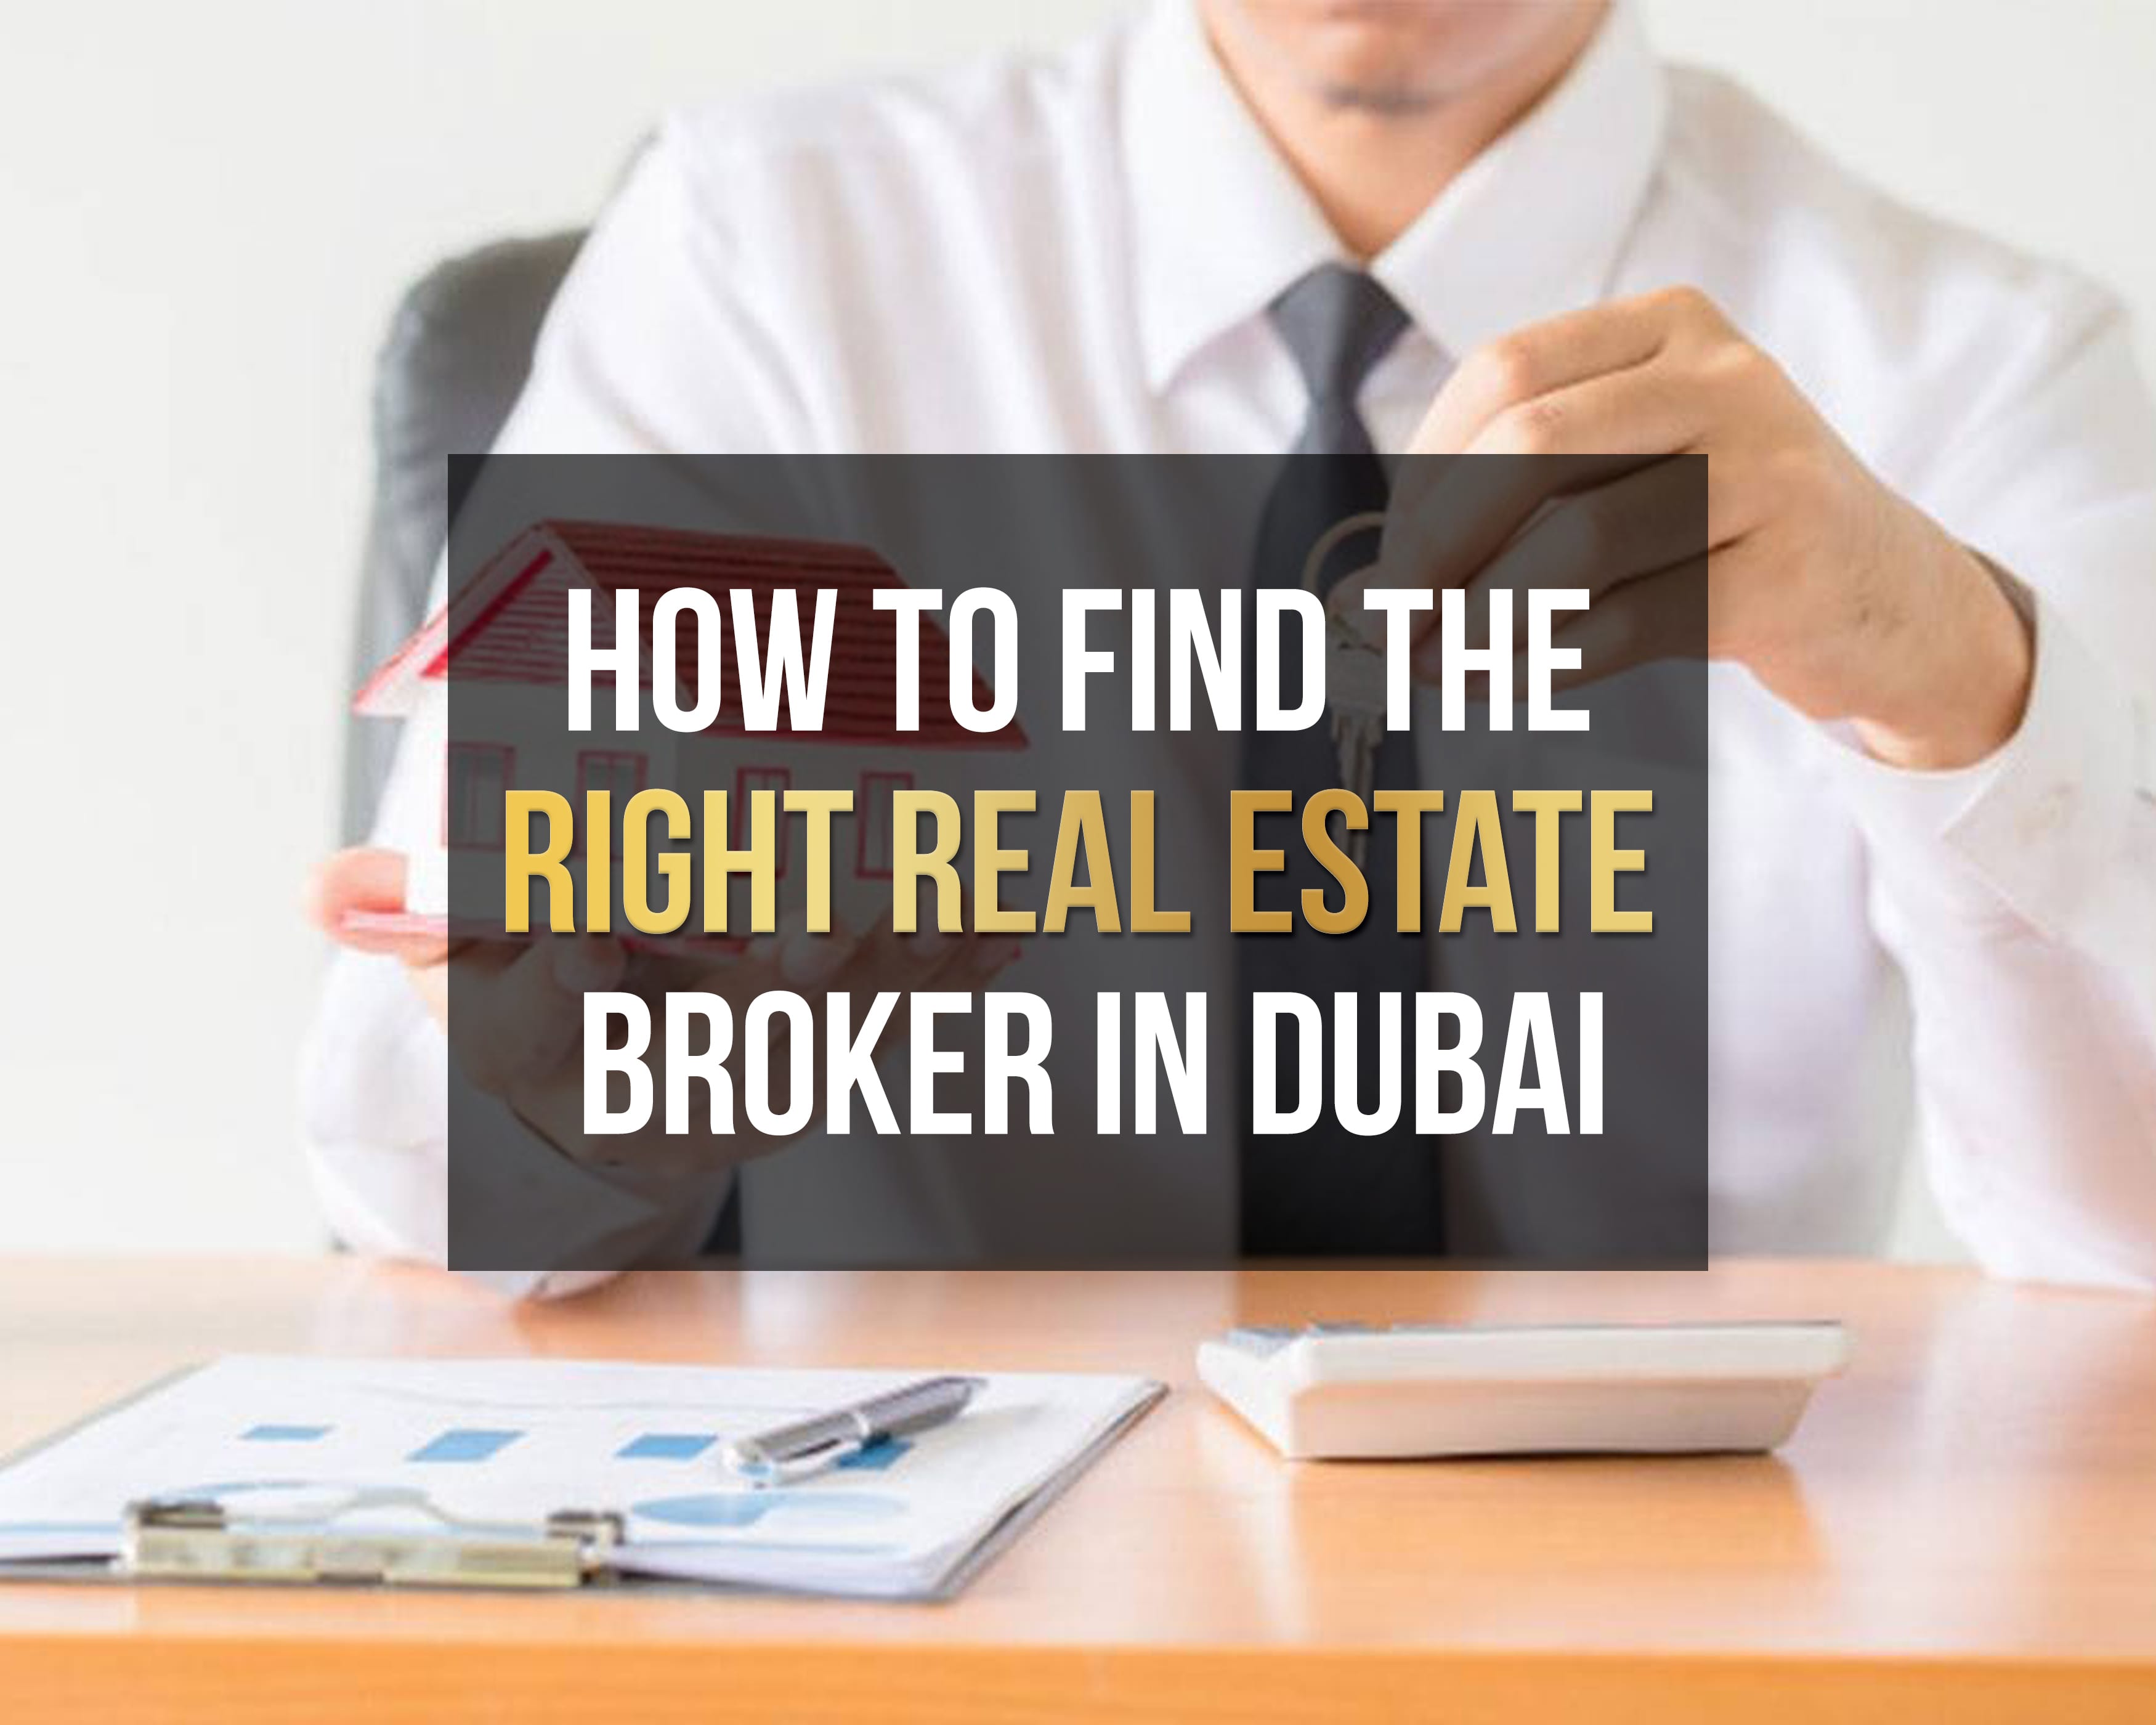 How to Find the Right Real Estate Broker in Dubai